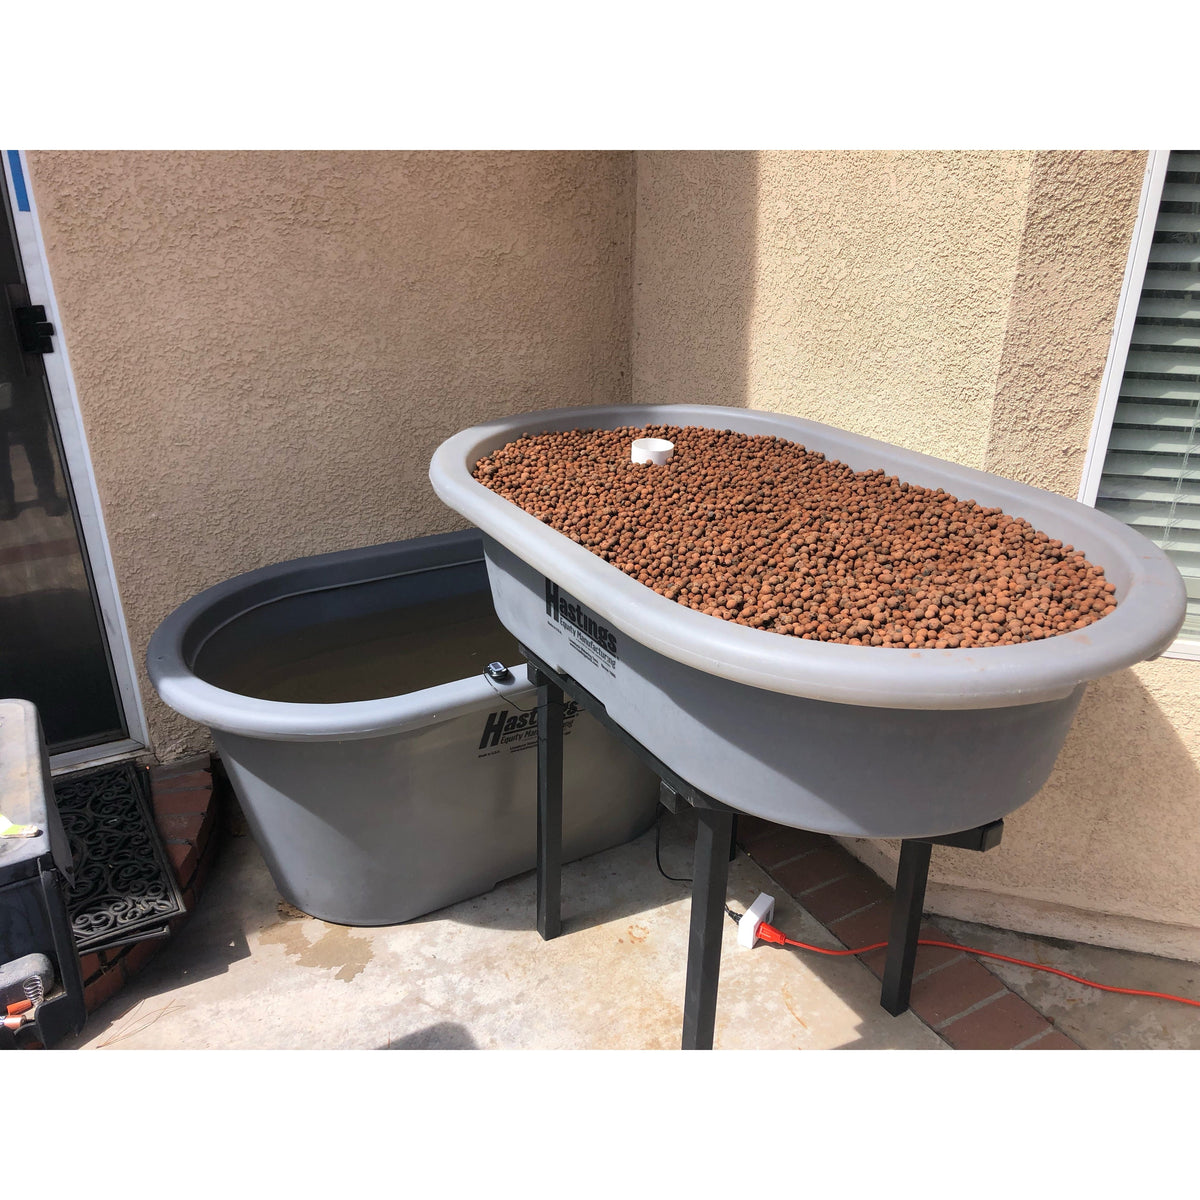 A spacious Go Green Double Aquaponics System fish tank filled with an abundant amount of gravel.